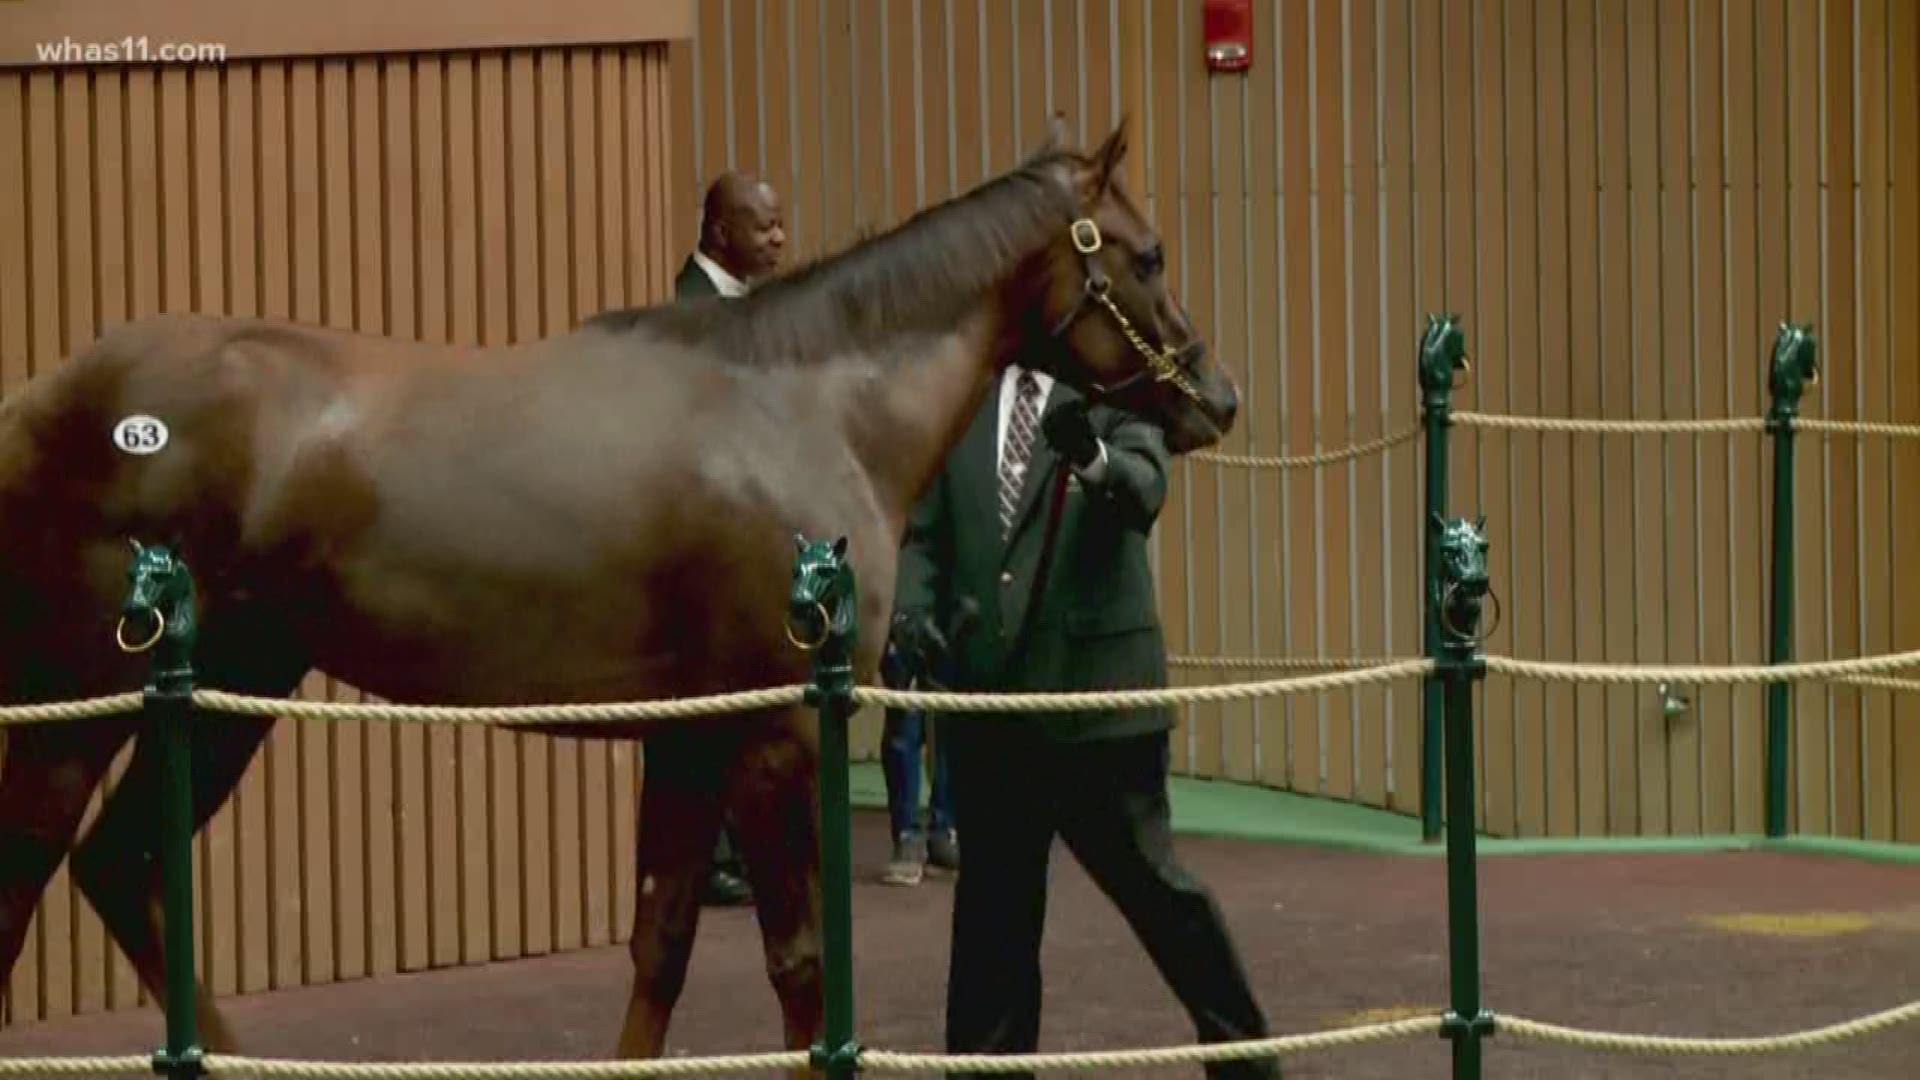 Two-year olds in training, as well as horses of racing age were on the auction block.